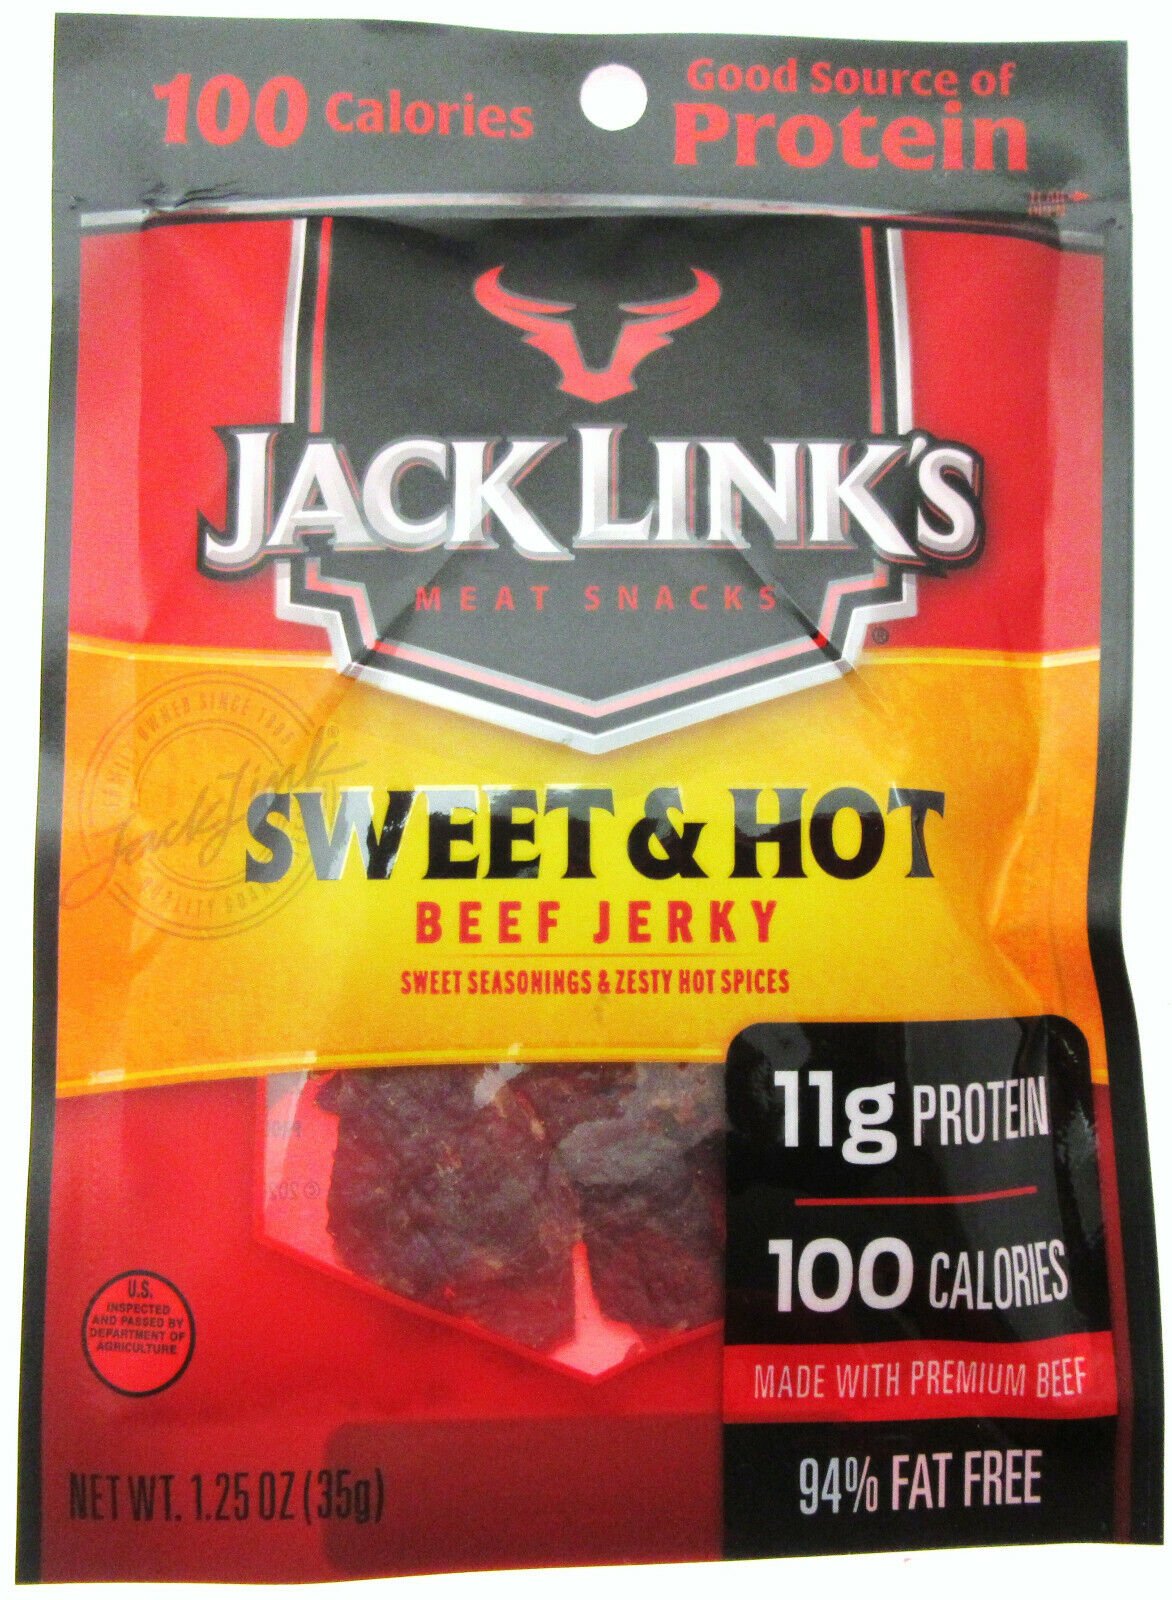 Jack Links Variety 9 pack ~ Peppered, Jalapeno, Sweet & Hot ~ Beef Jerky